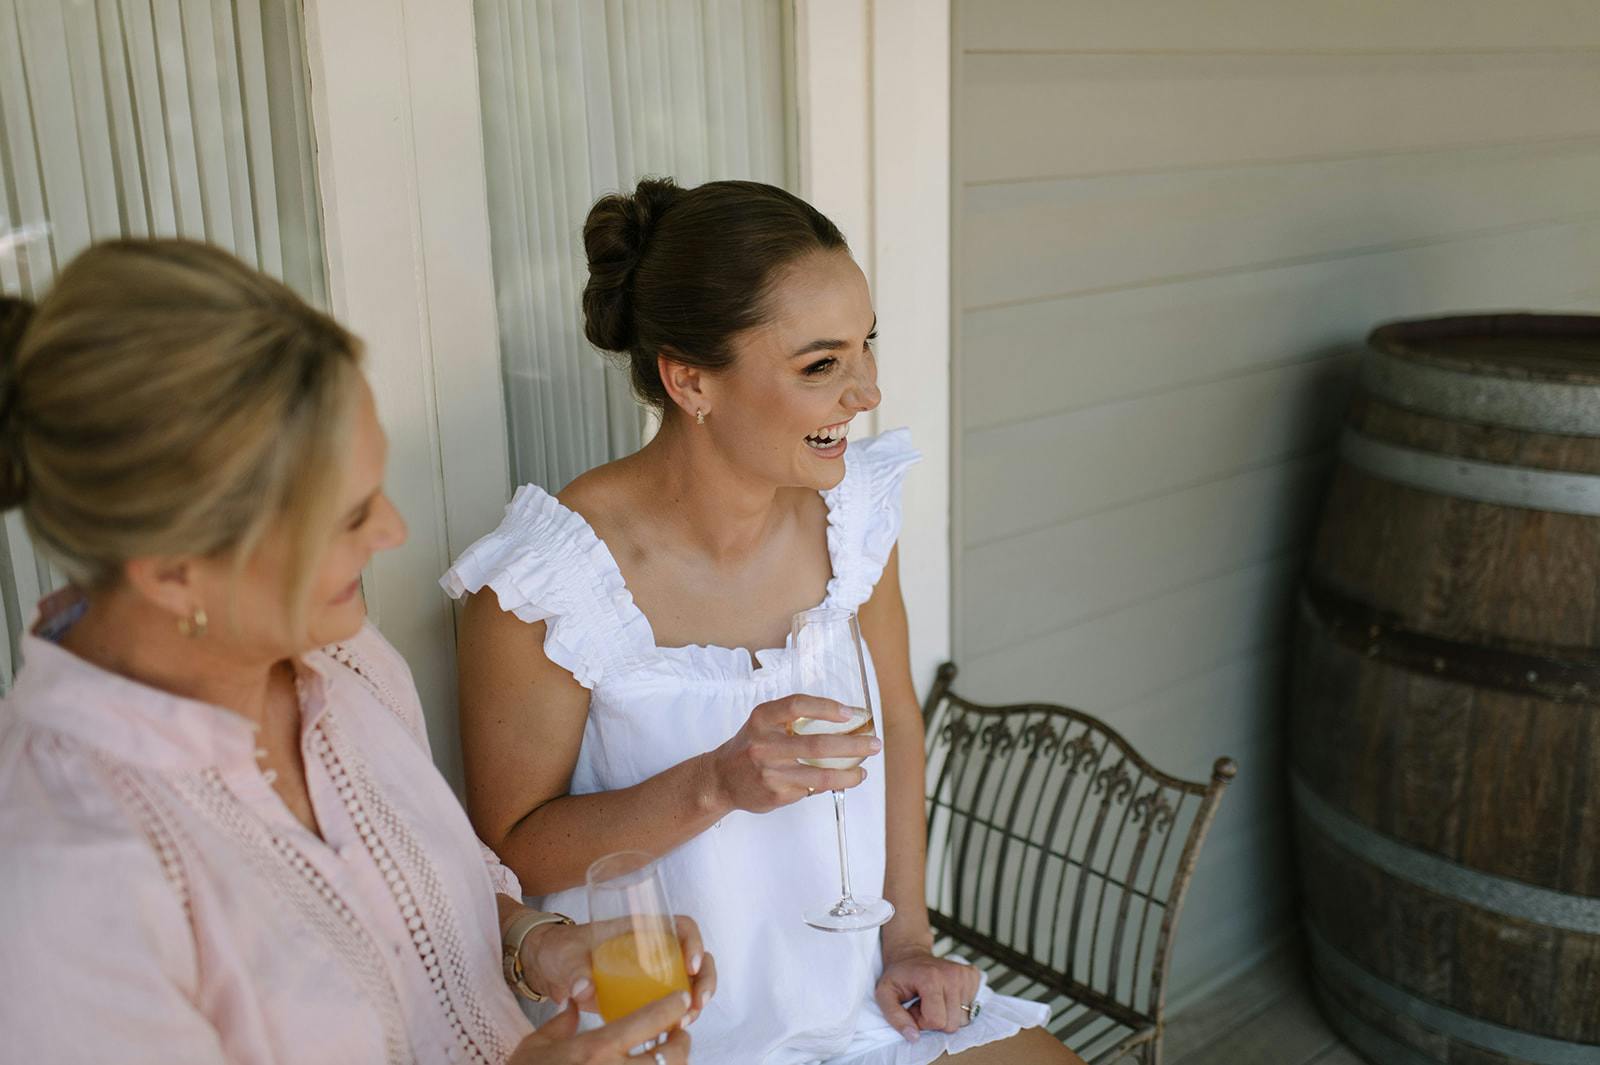 Two women enjoying drinks on a porch. The woman on the right, in a white sleeveless dress, holds a wine glass and laughs. The woman on the left, wearing a light pink blouse, holds an orange drink. They sit near a wooden barrel and a metal chair.